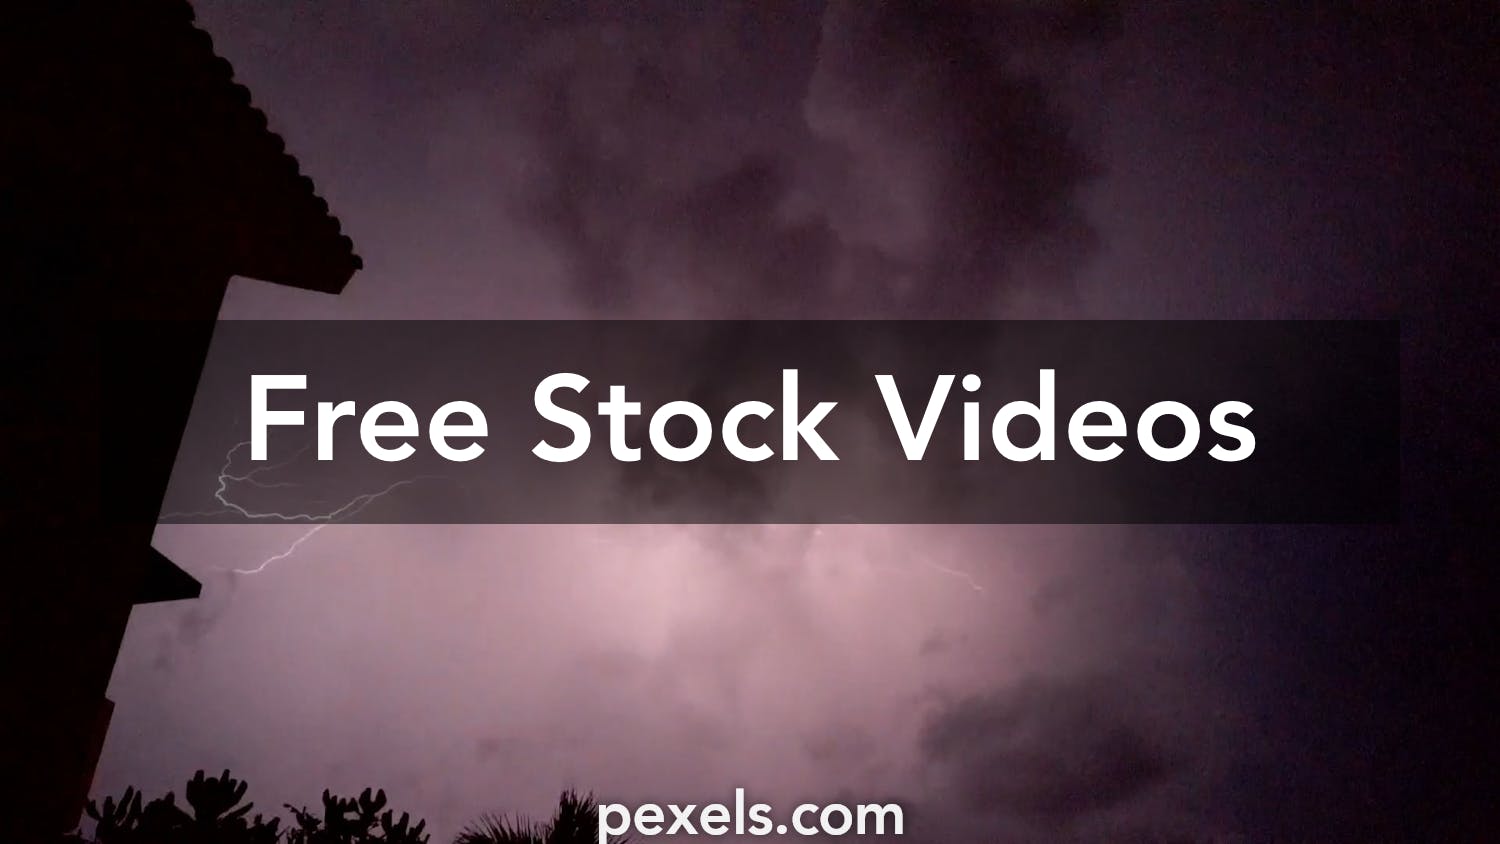 Thunder Cloud Videos, Download The BEST Free 4k Stock Video